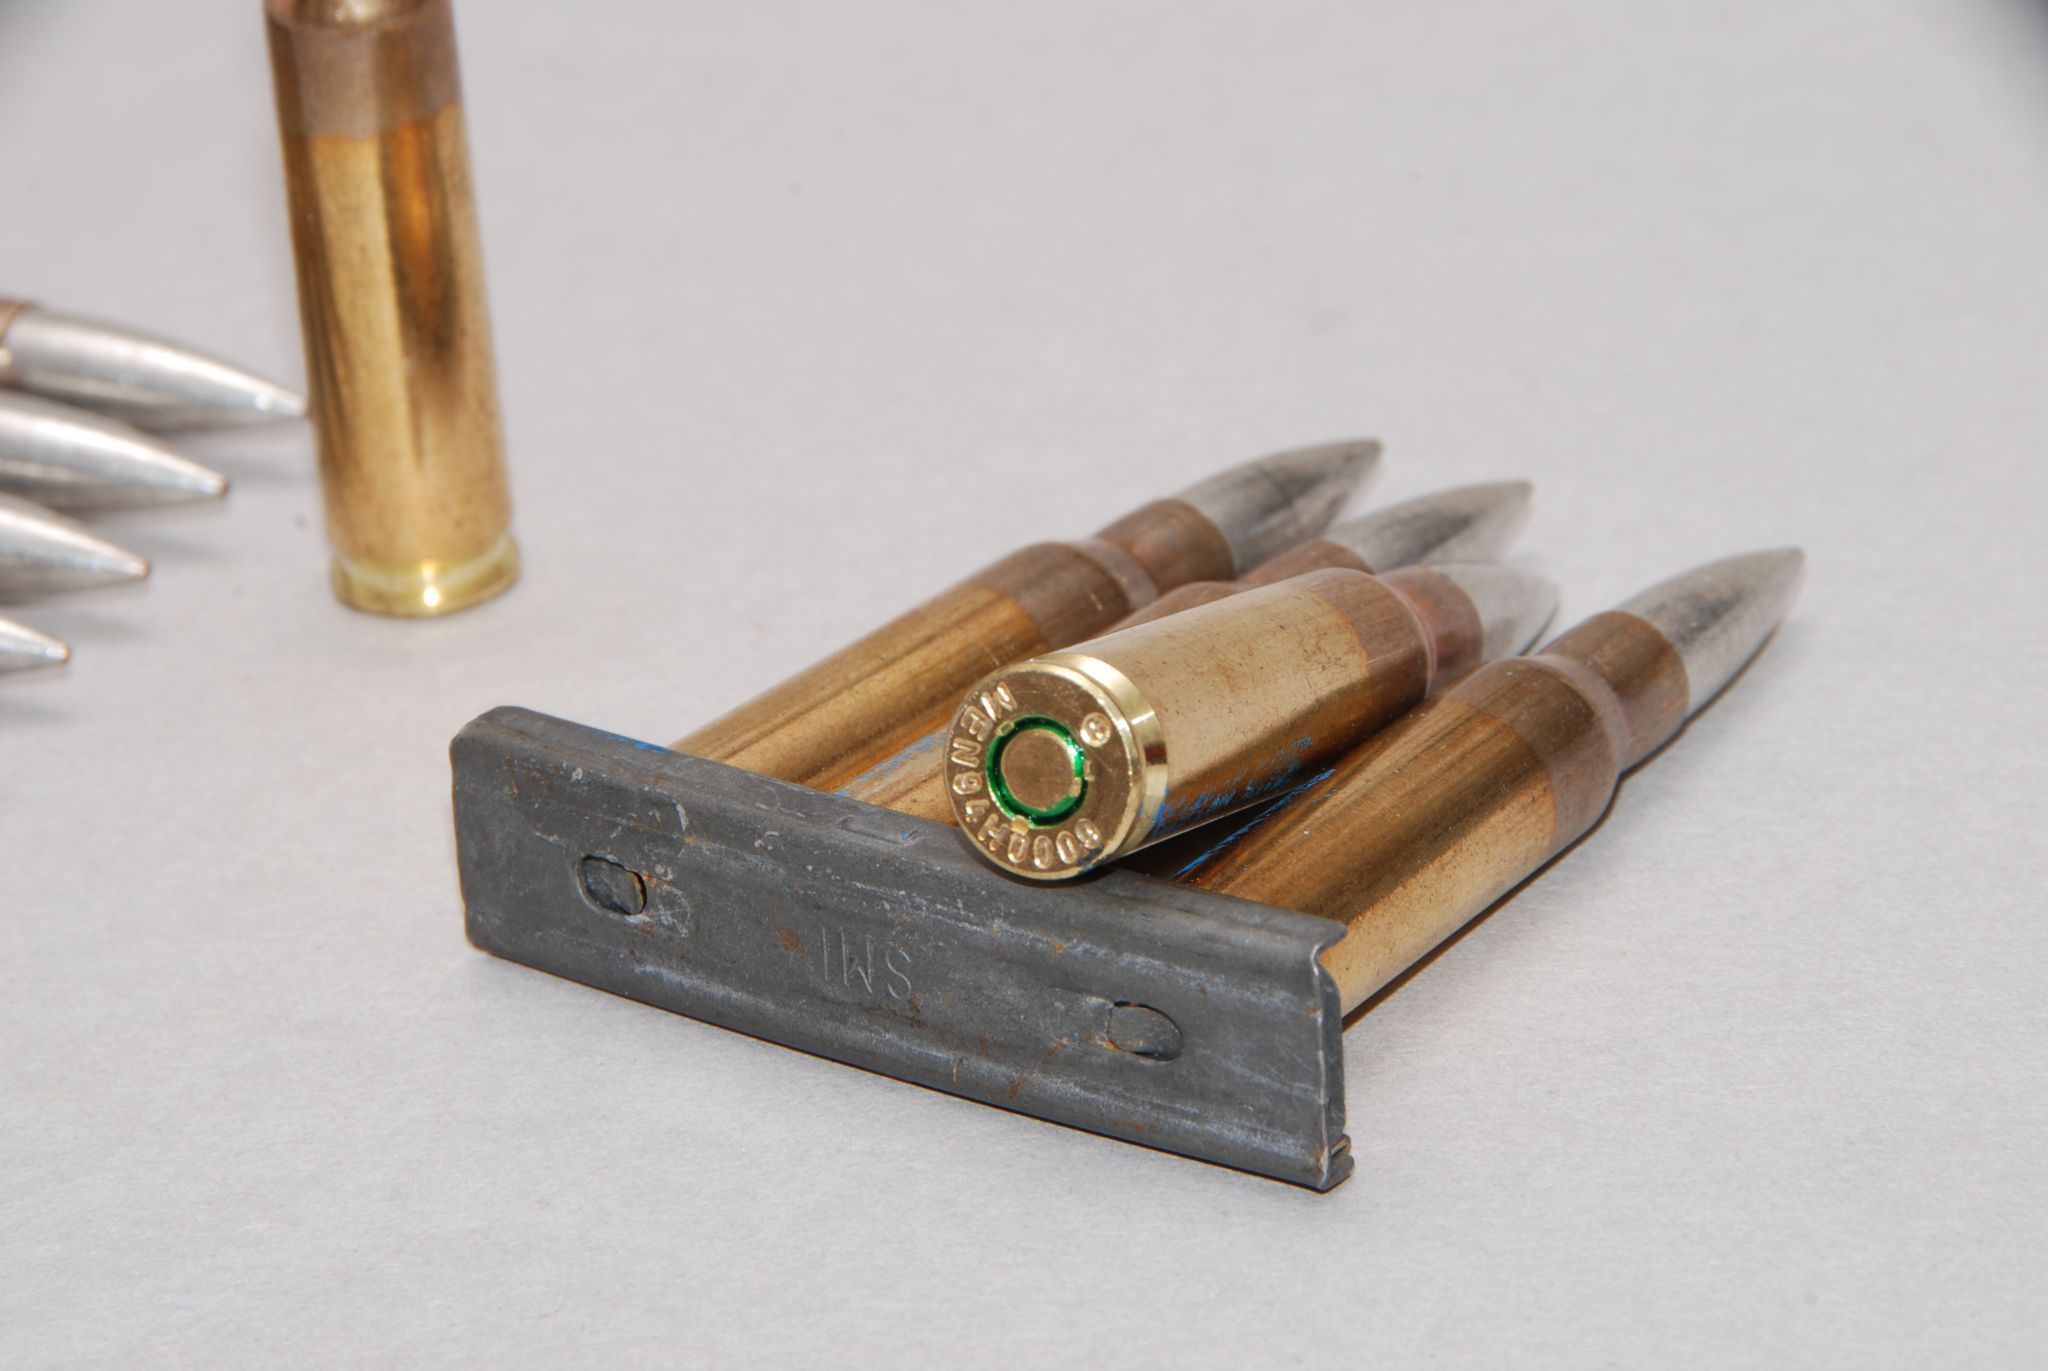 Gallery: Winchester .308 7